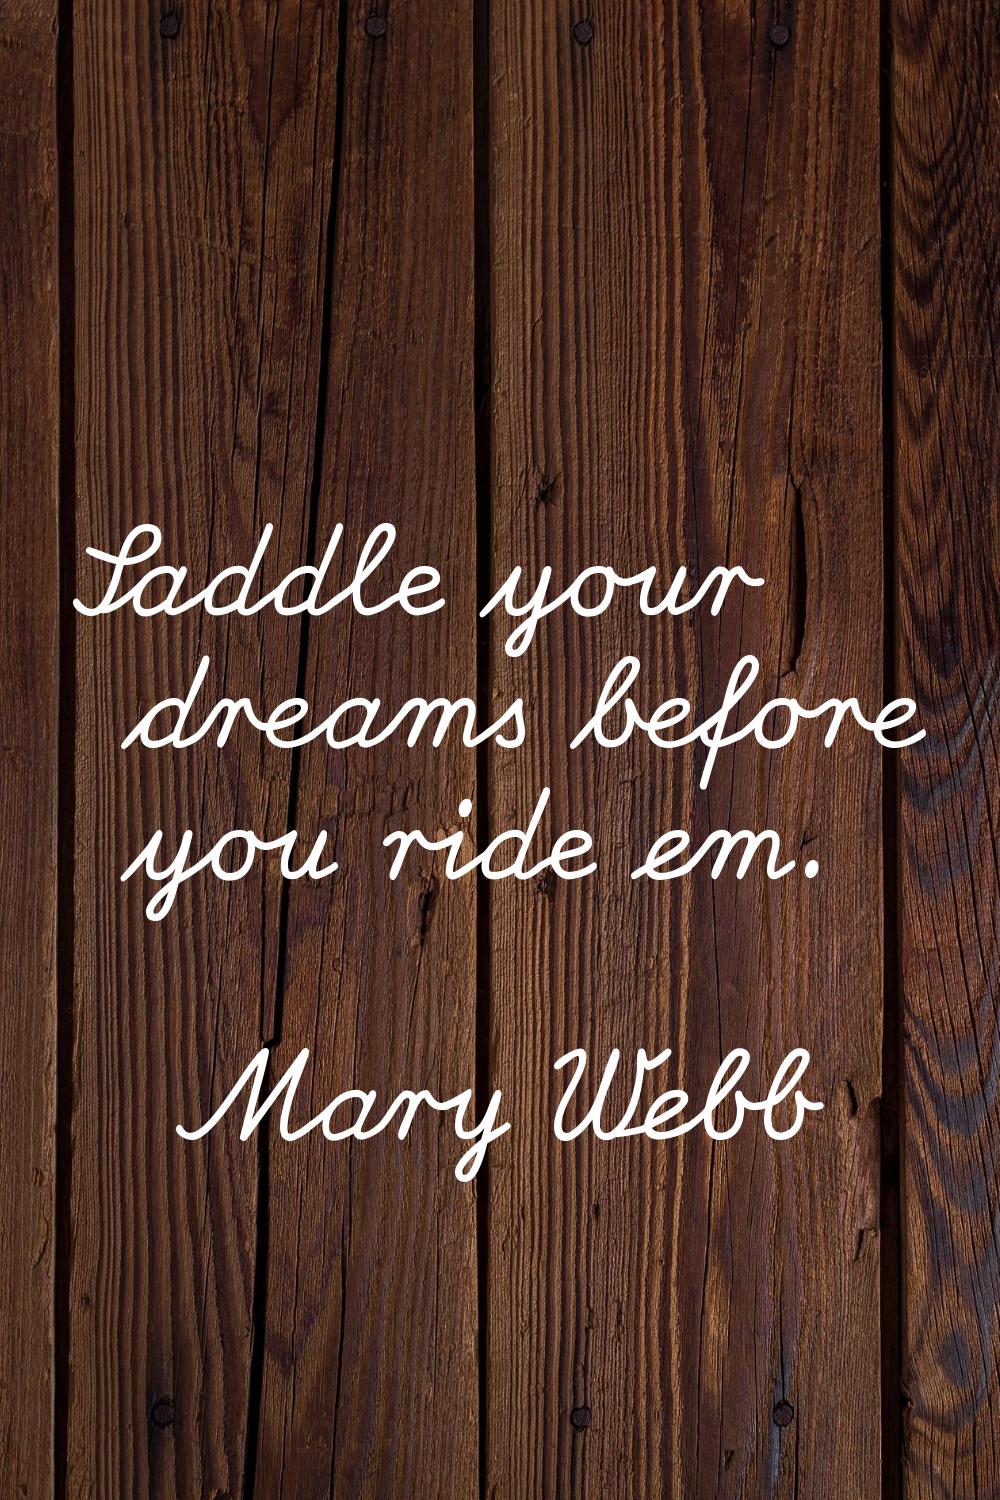 Saddle your dreams before you ride em.